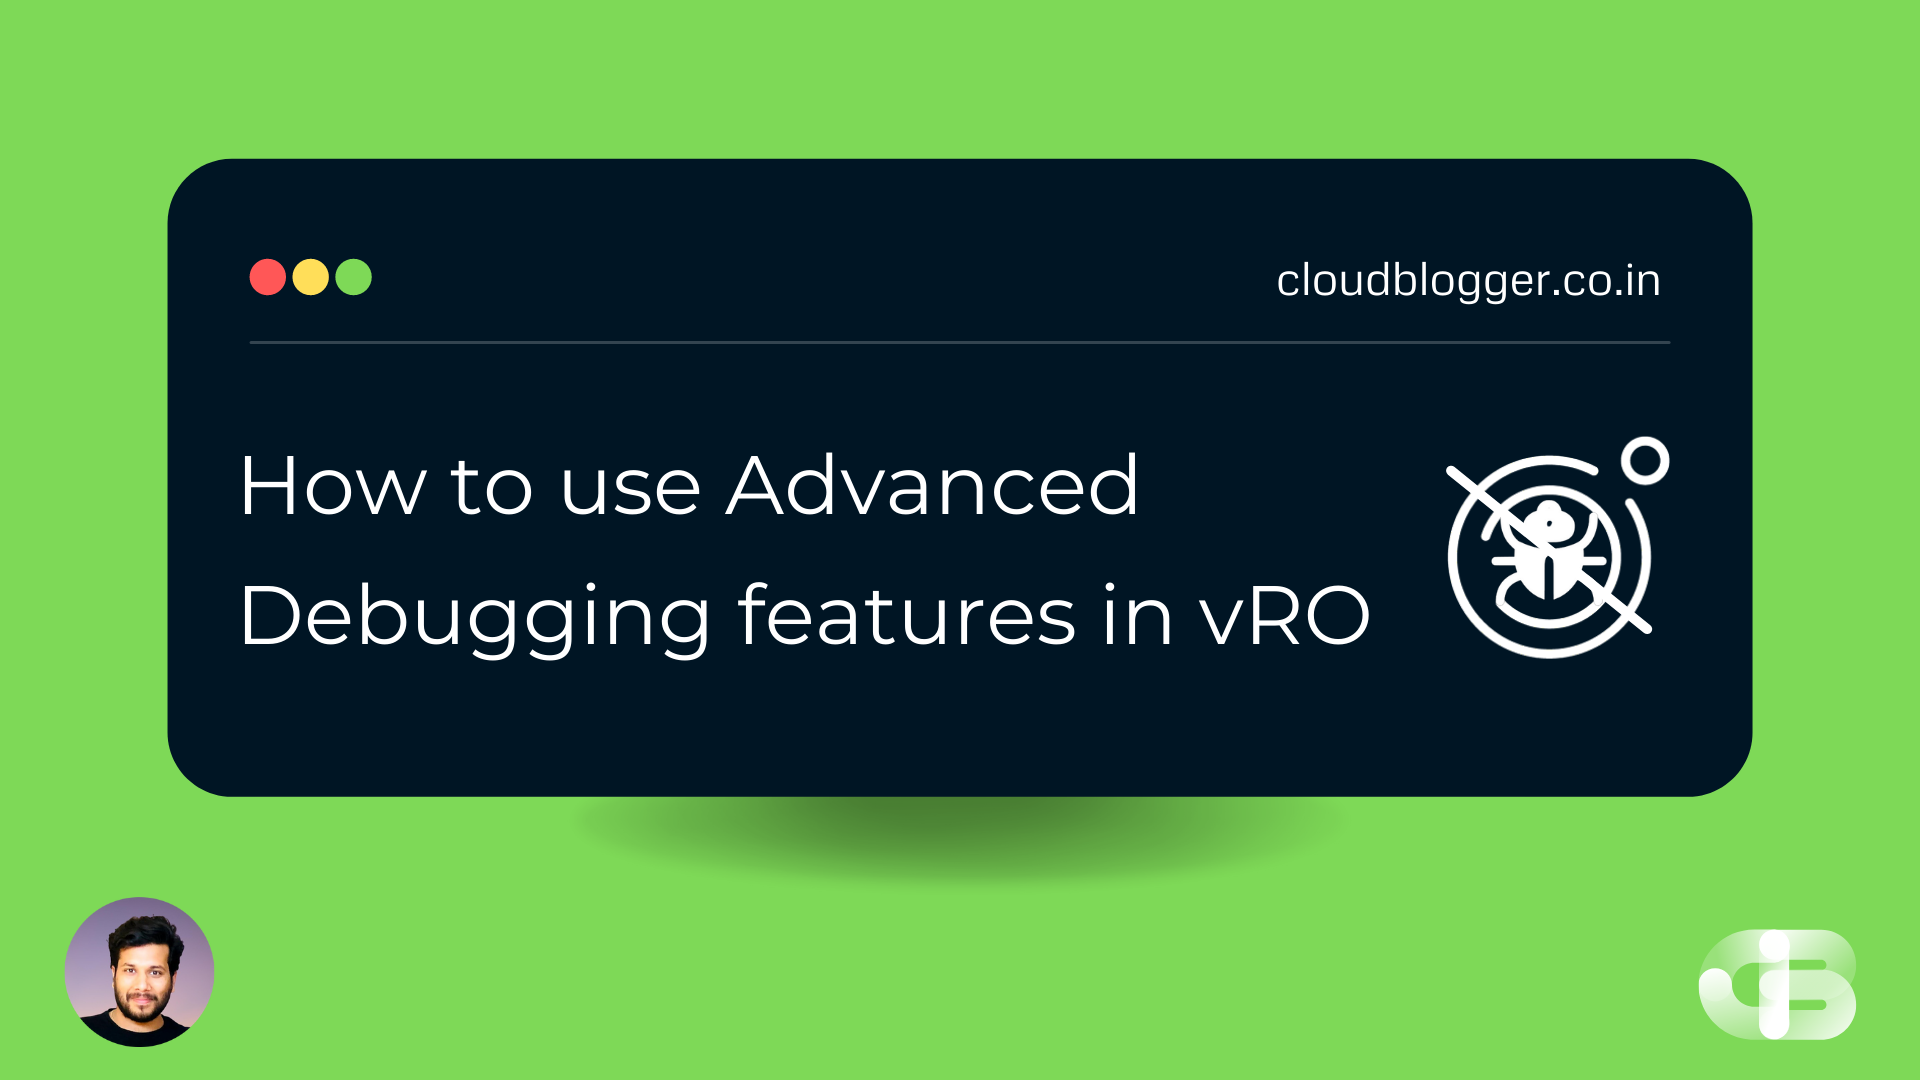 vRO Debugger: How to use advanced features